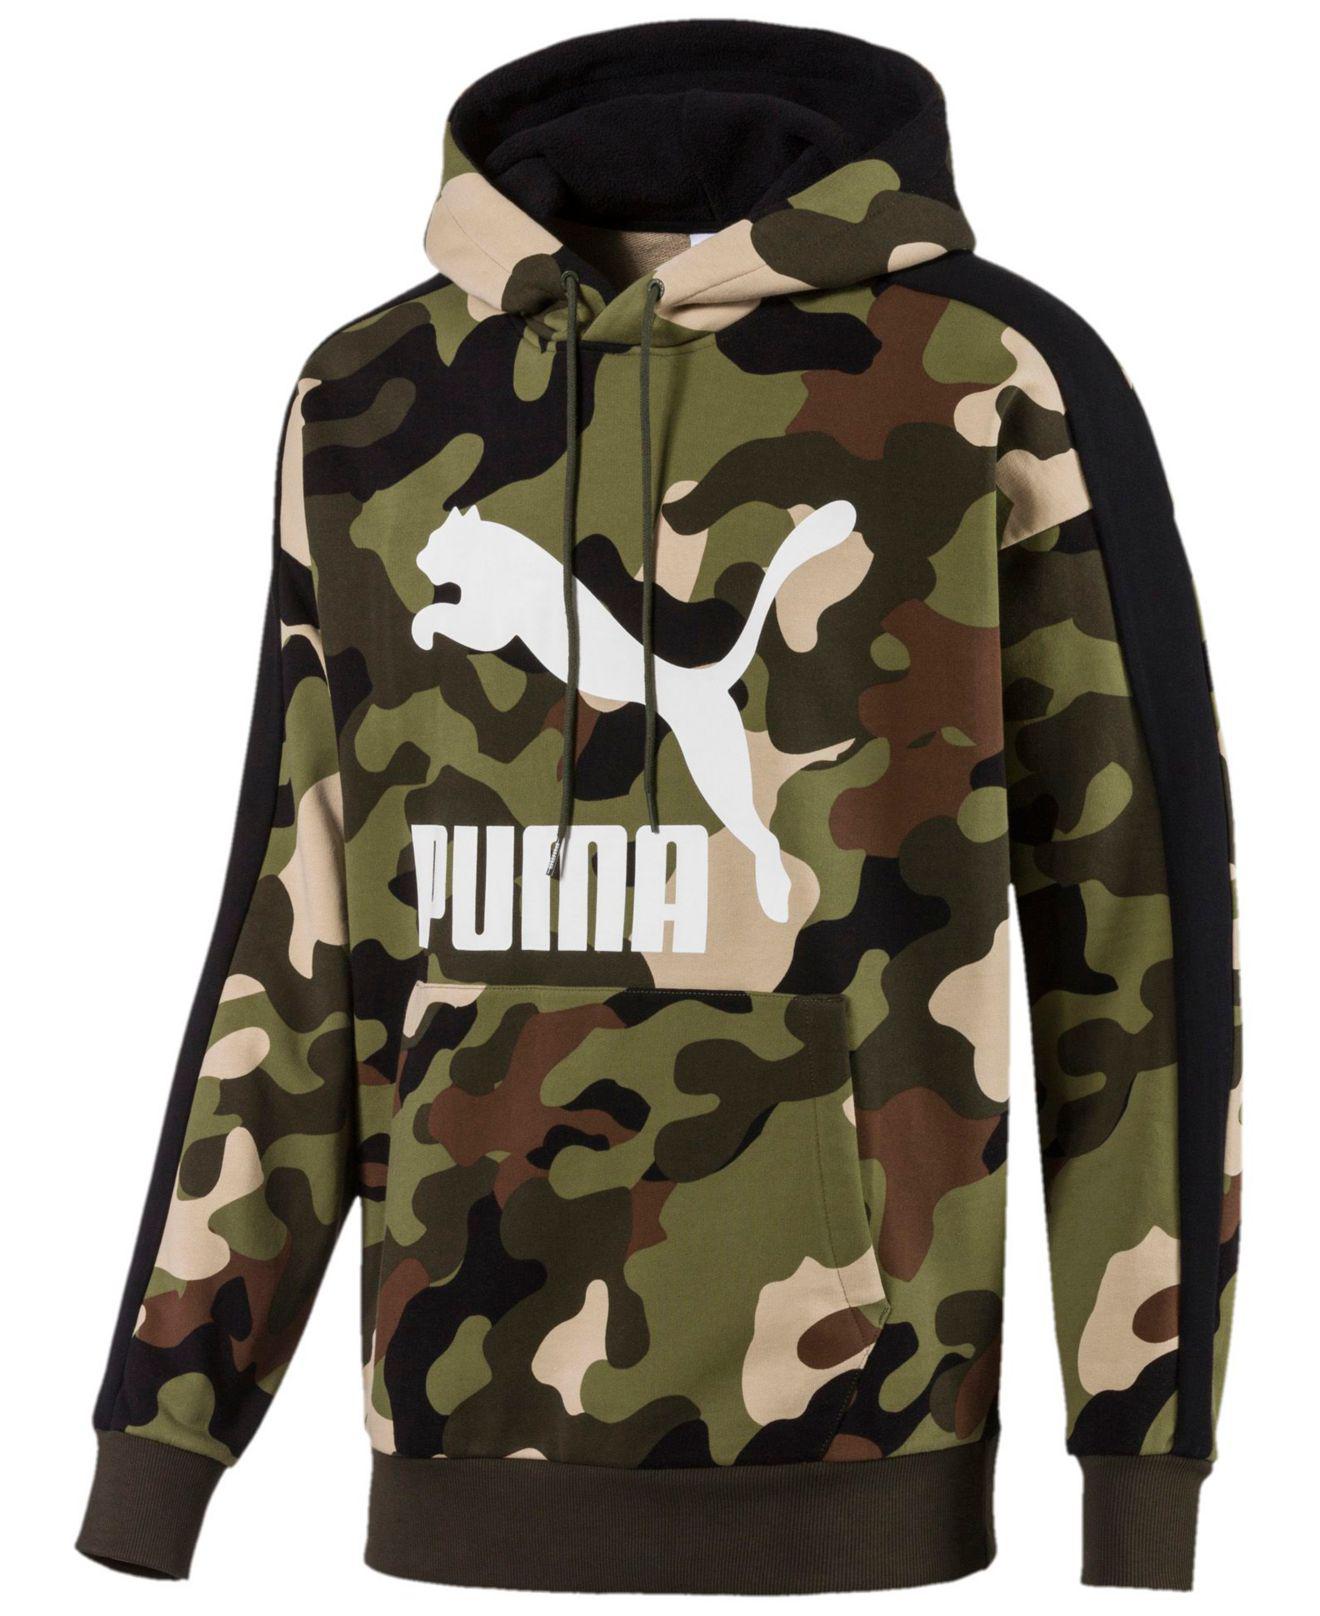 PUMA Cotton Pullover Camo Hoodie in Forest Night (Green) for Men - Lyst